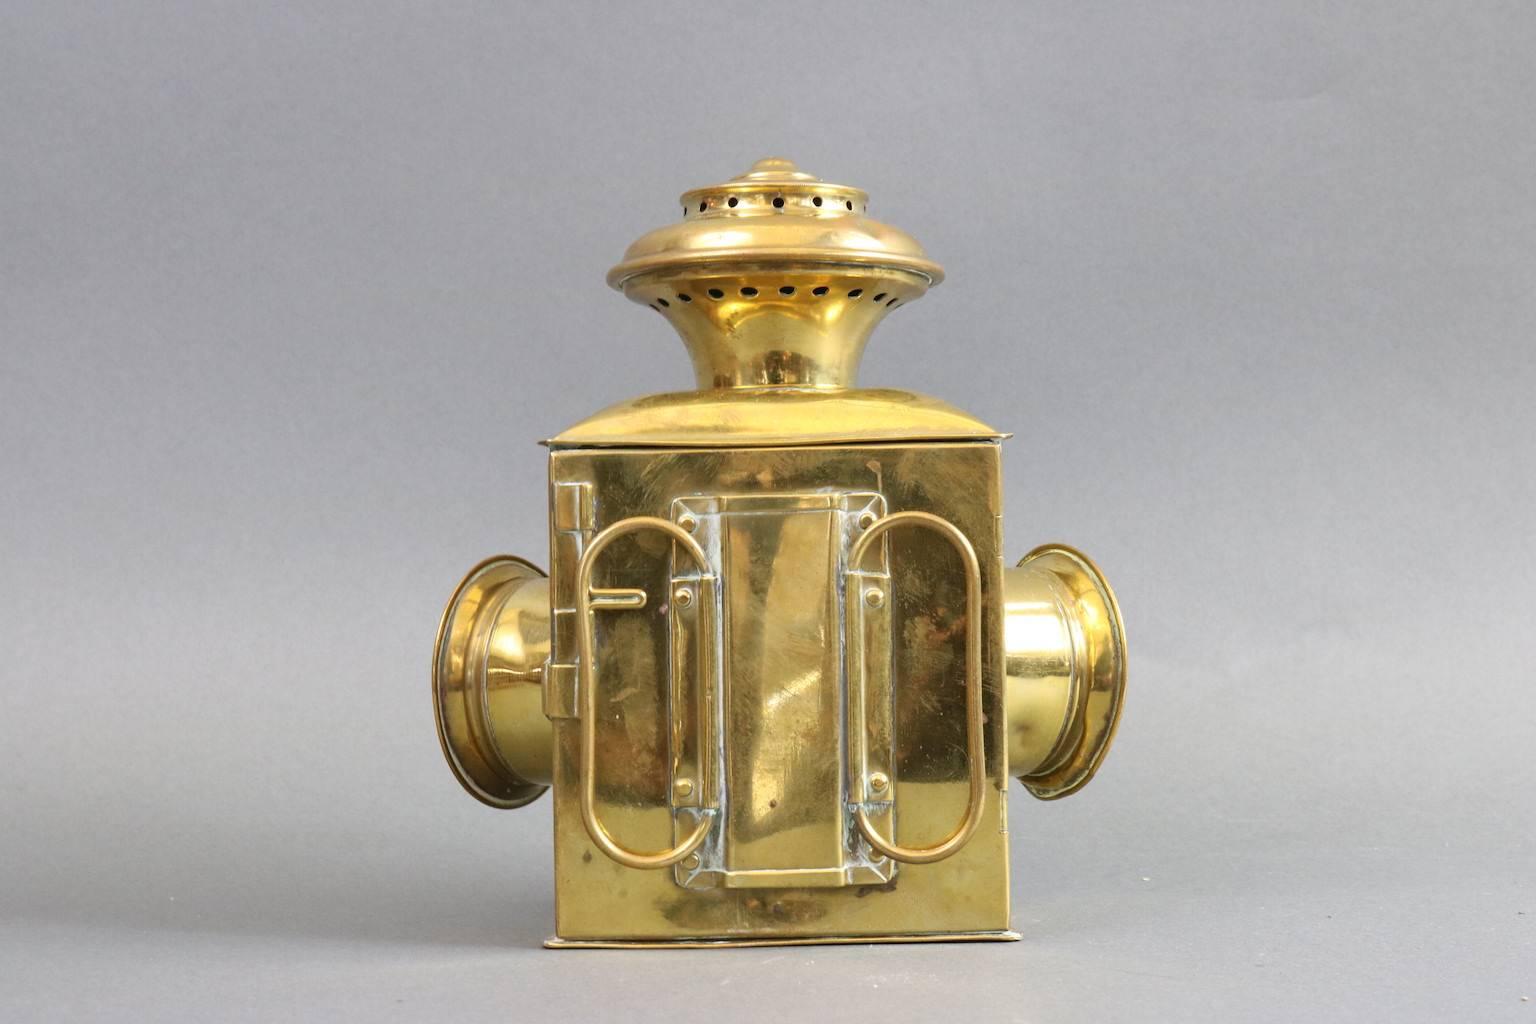 Brass bow lantern with red, clear and blue colored lenses. Mounted to a plaque, late 19th century. Dimensions: 8" L x 4.5" W x 8" H (without backing).